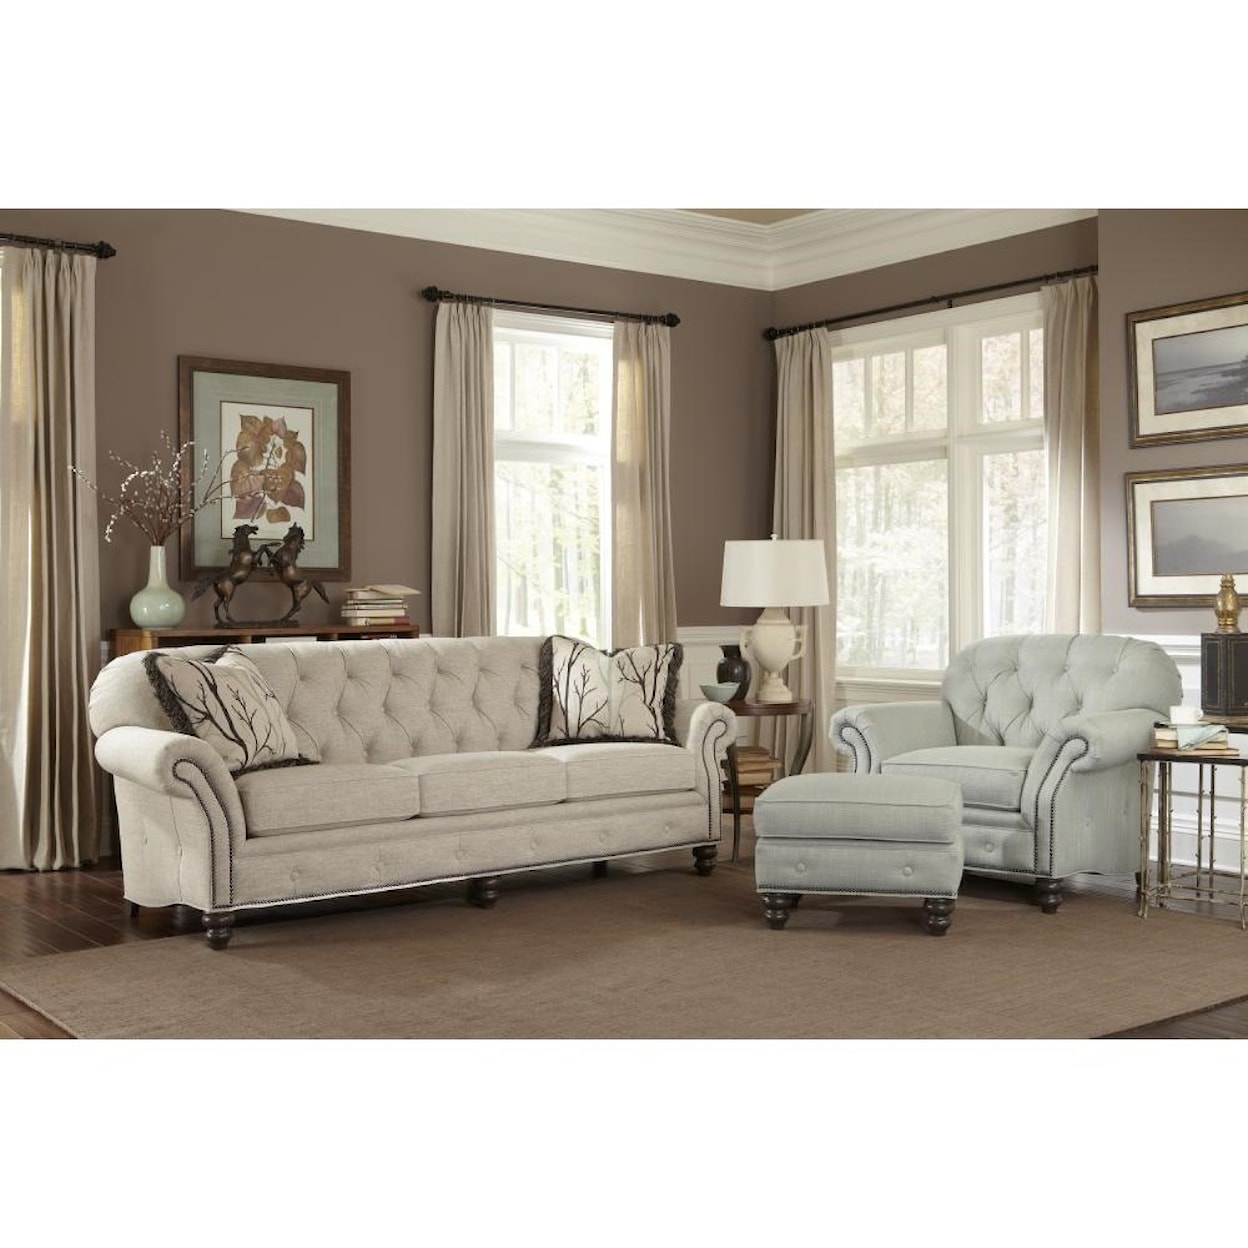 Smith Brothers 396 Large Sofa